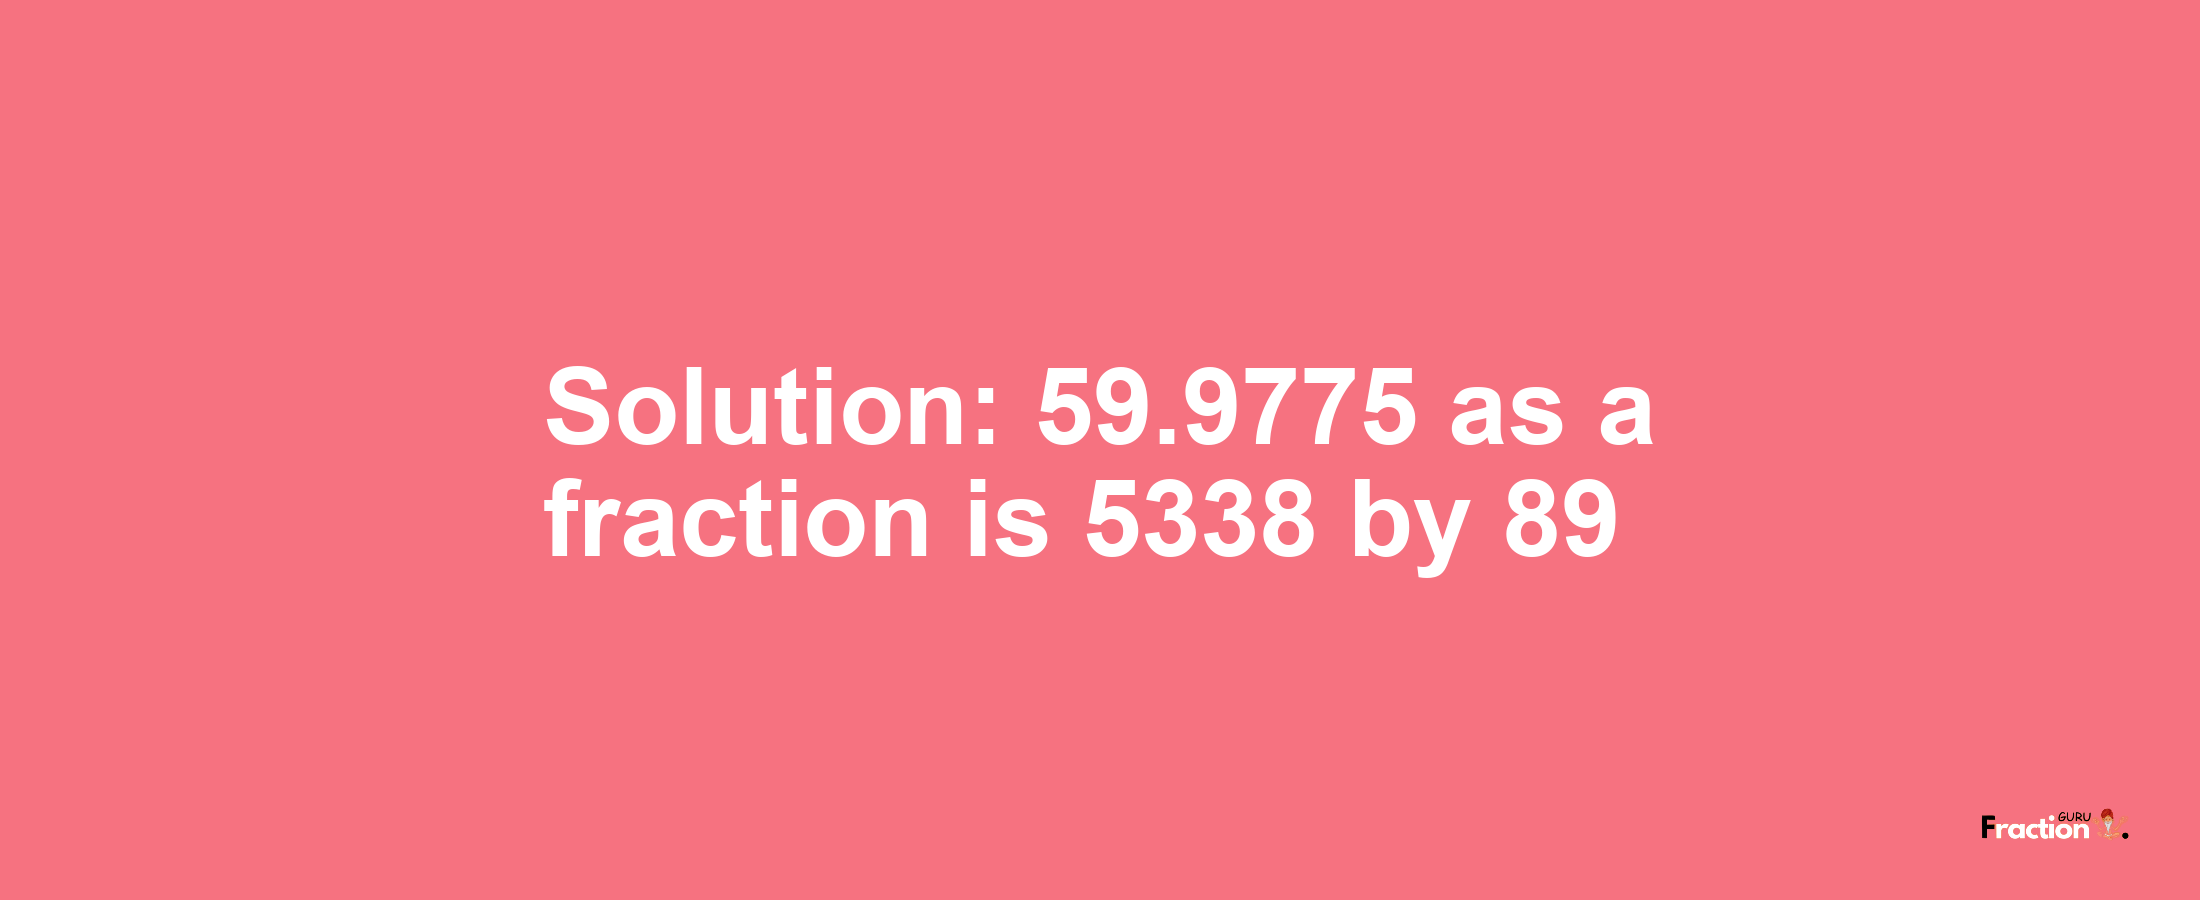 Solution:59.9775 as a fraction is 5338/89